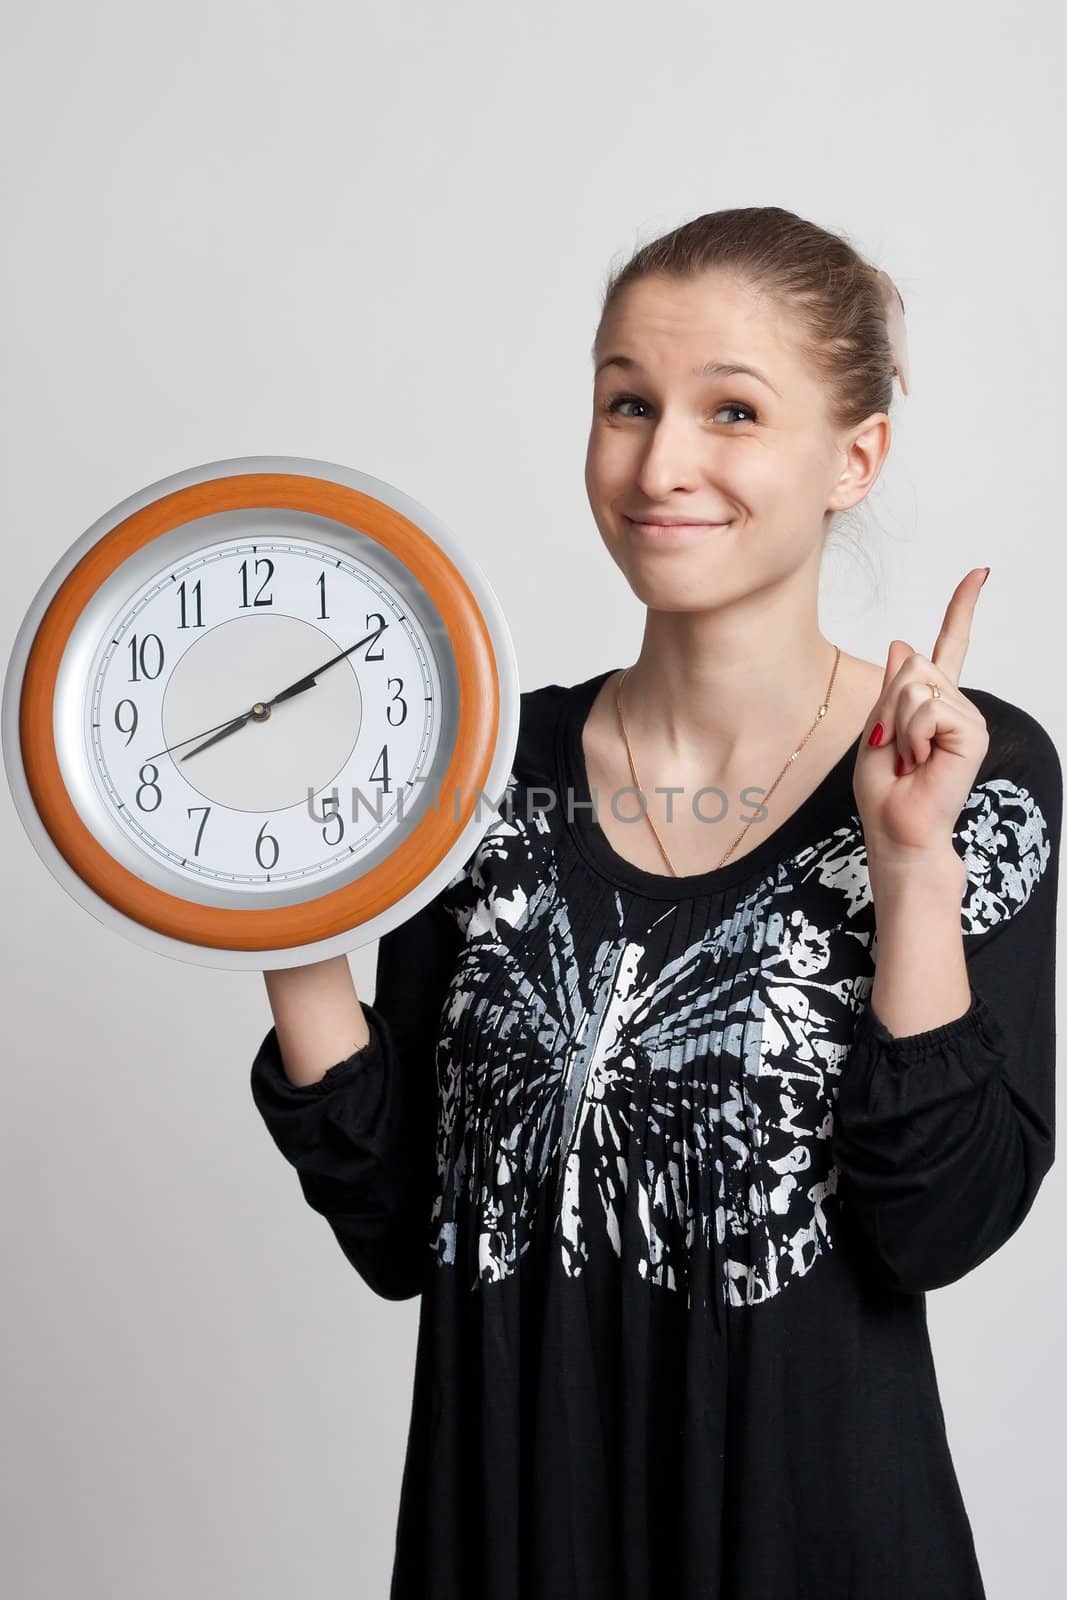 beautiful girl with a big clock in his hand raises his index finger up